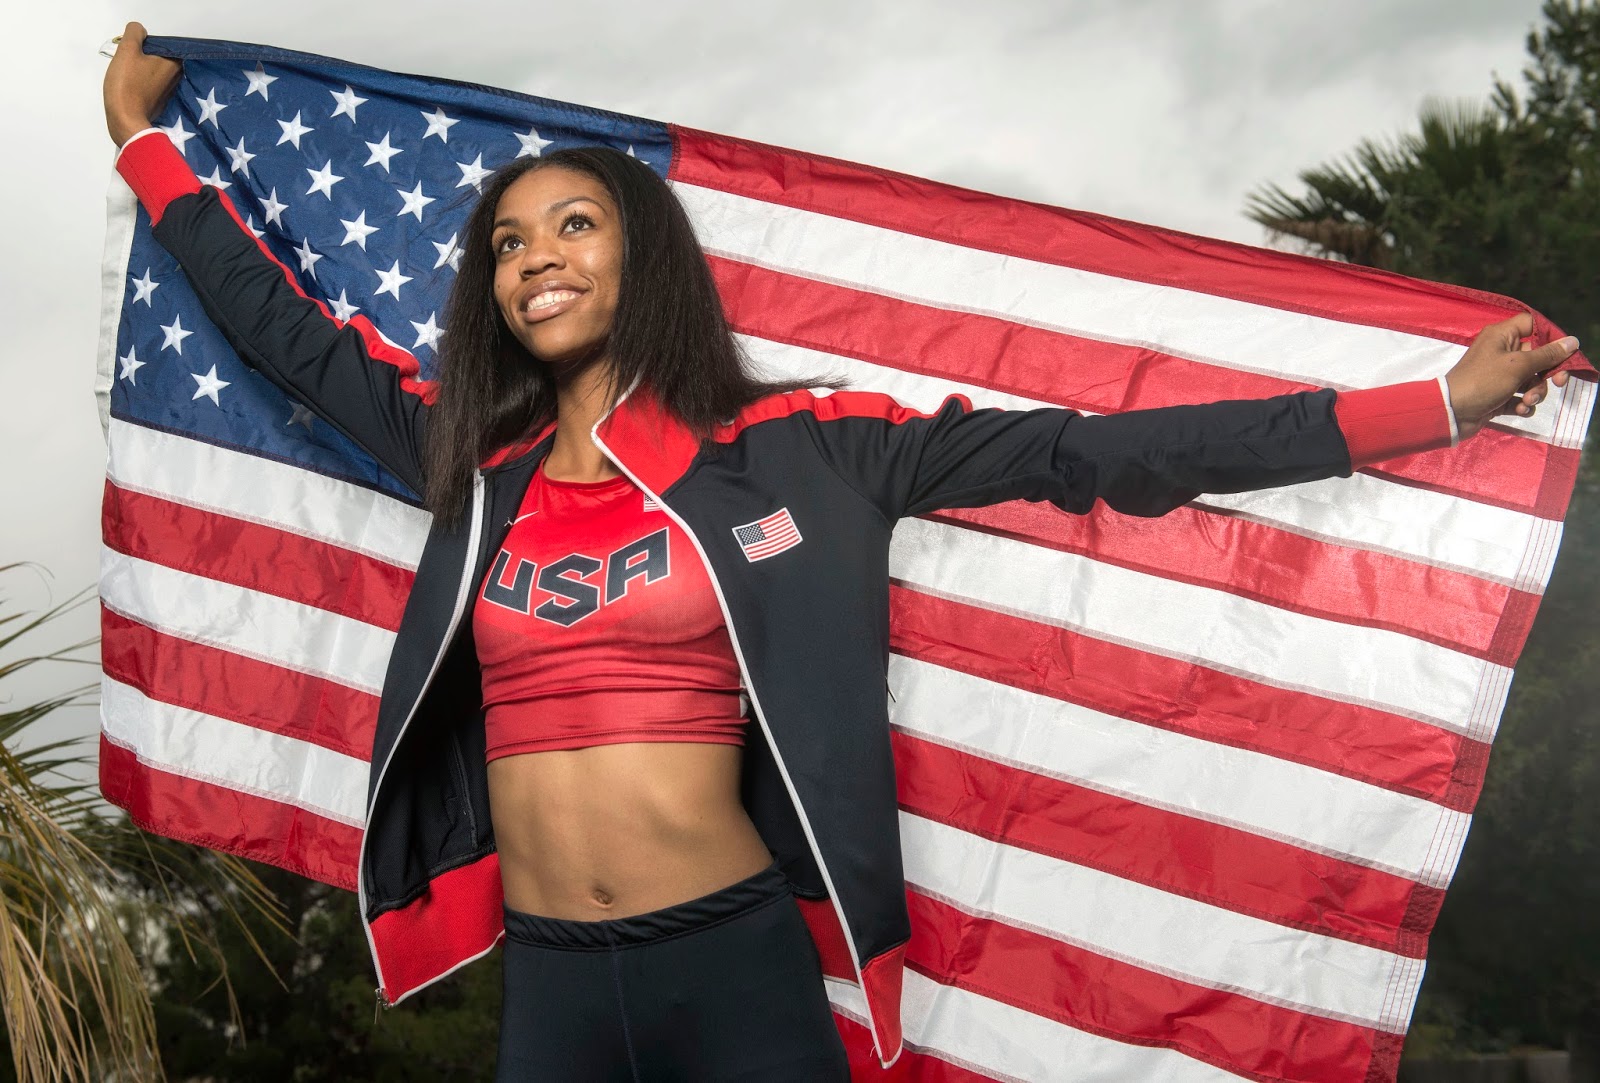 Here are some recent photos of Olympic high jumper Vashti Cunningham for Sp...